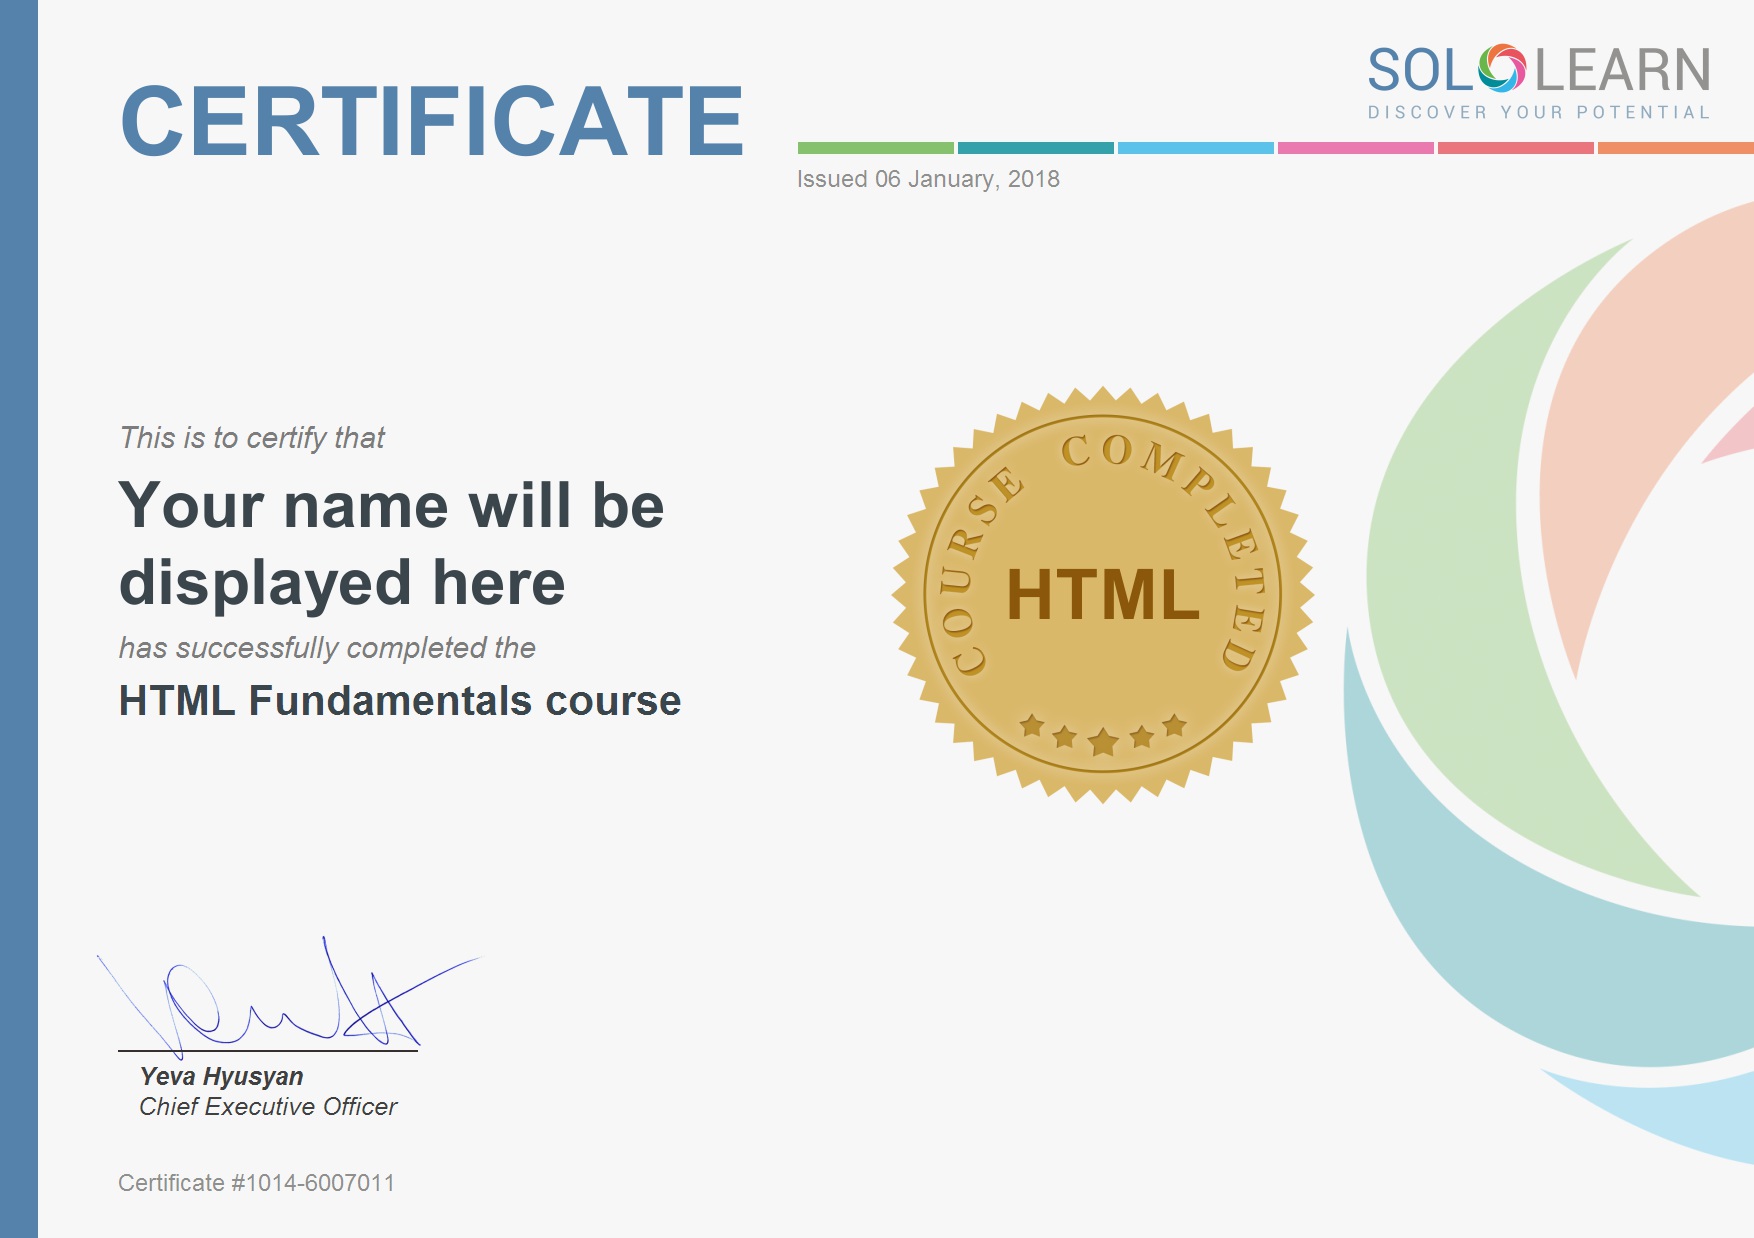 SoloLearn - The handy app to learn to code on mobile for self-taught